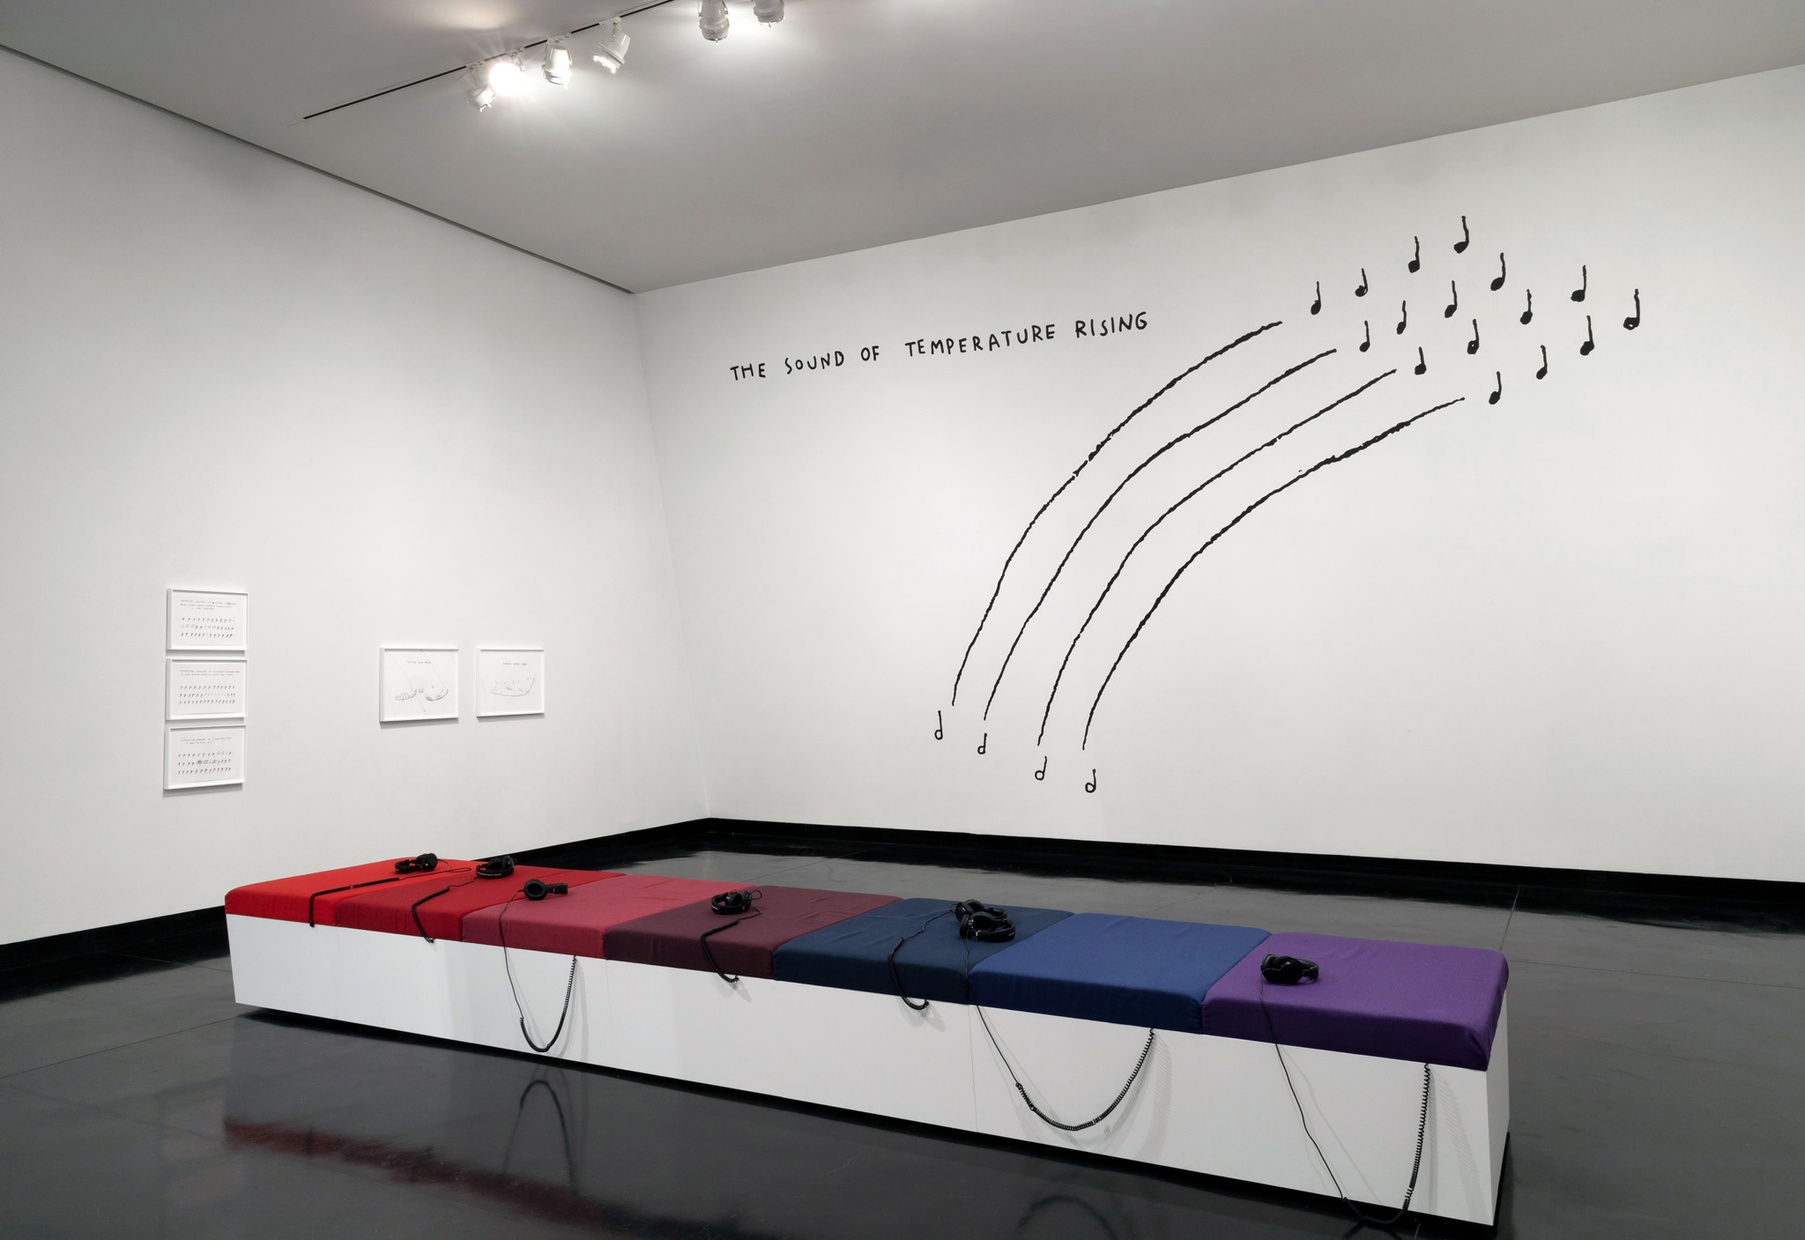 A gallery features one wall with five hanging artworks, and another wall with a large mural with black illustrations and text, and a bench with red, blue, and purple cushions.